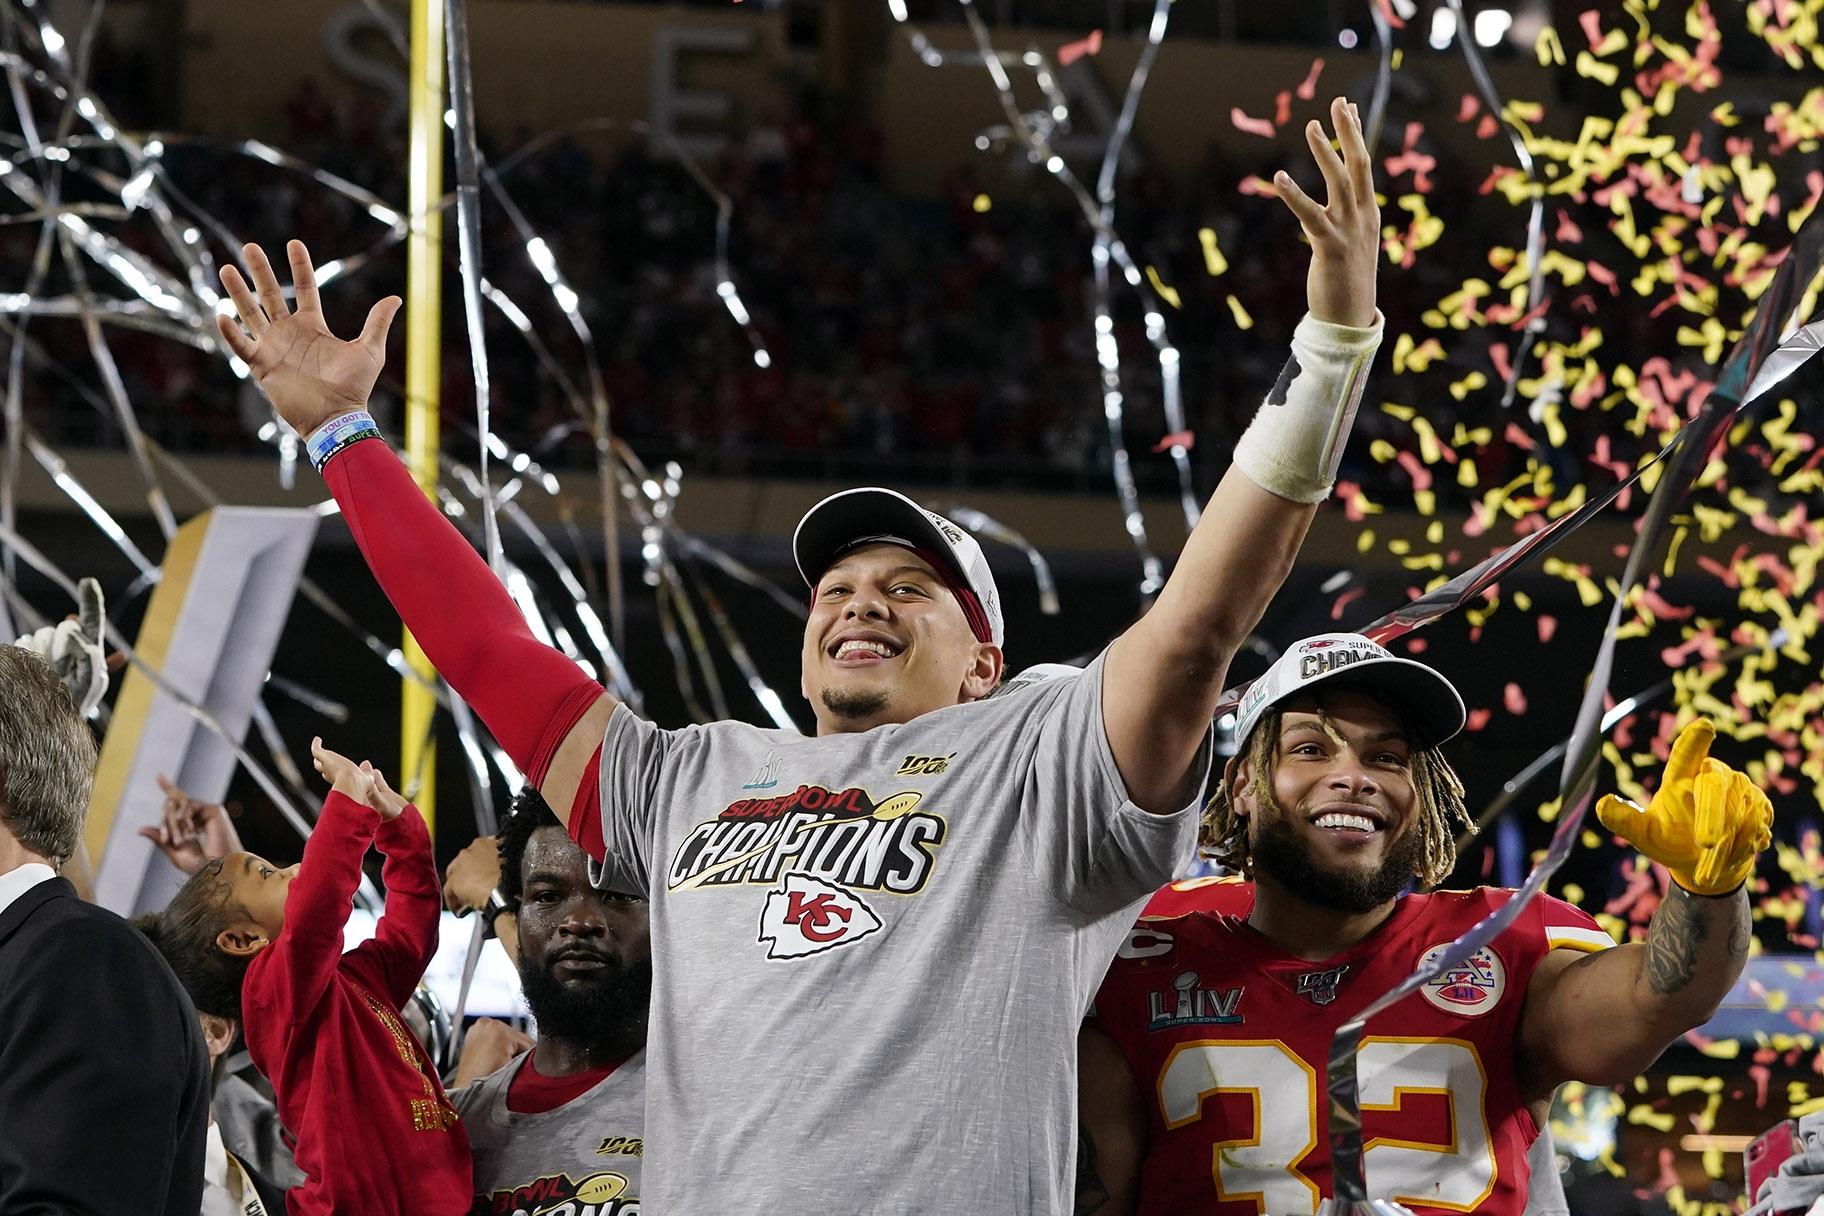 Kansas City Chiefs’ Patrick Mahomes, left, and Tyrann Mathieu celebrate after defeating the San Francisco 49ers in the NFL Super Bowl 54 football game Sunday, Feb. 2, 2020, in Miami Gardens, Fla. (AP Photo / David J. Phillip)